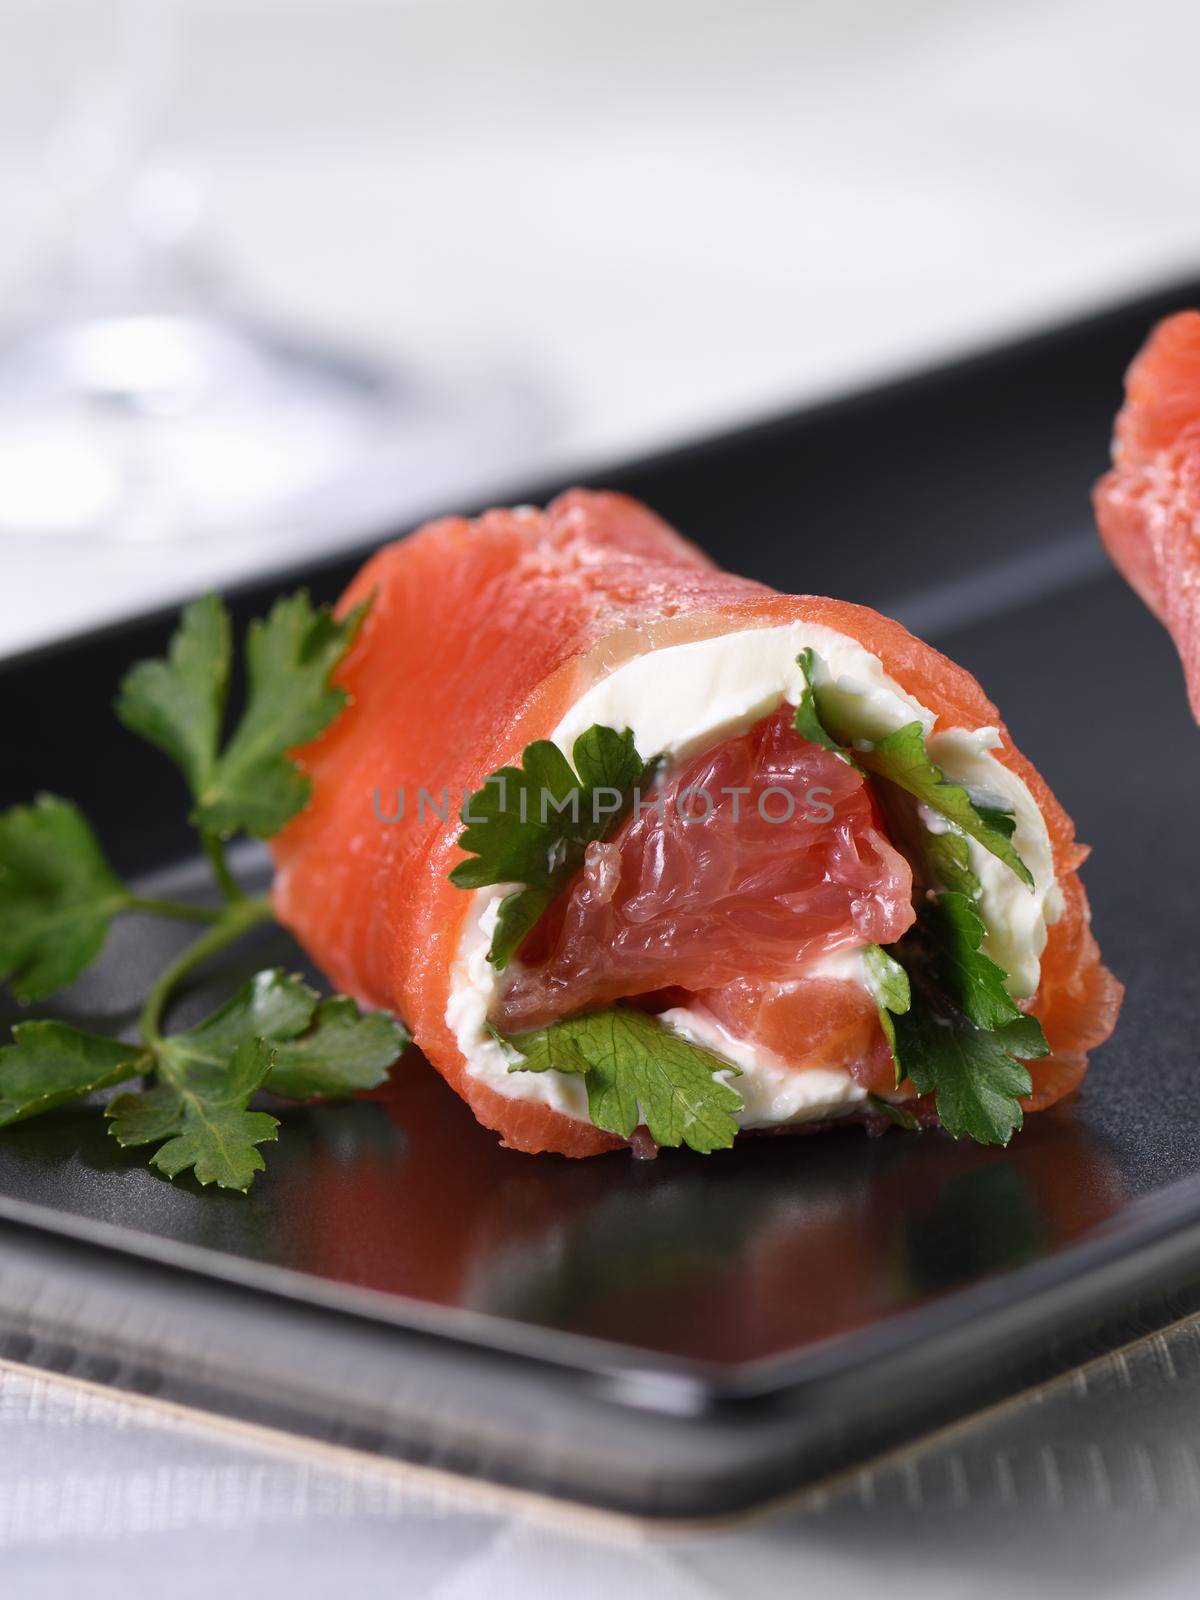 Aperitif appetizer of salmon by Apolonia